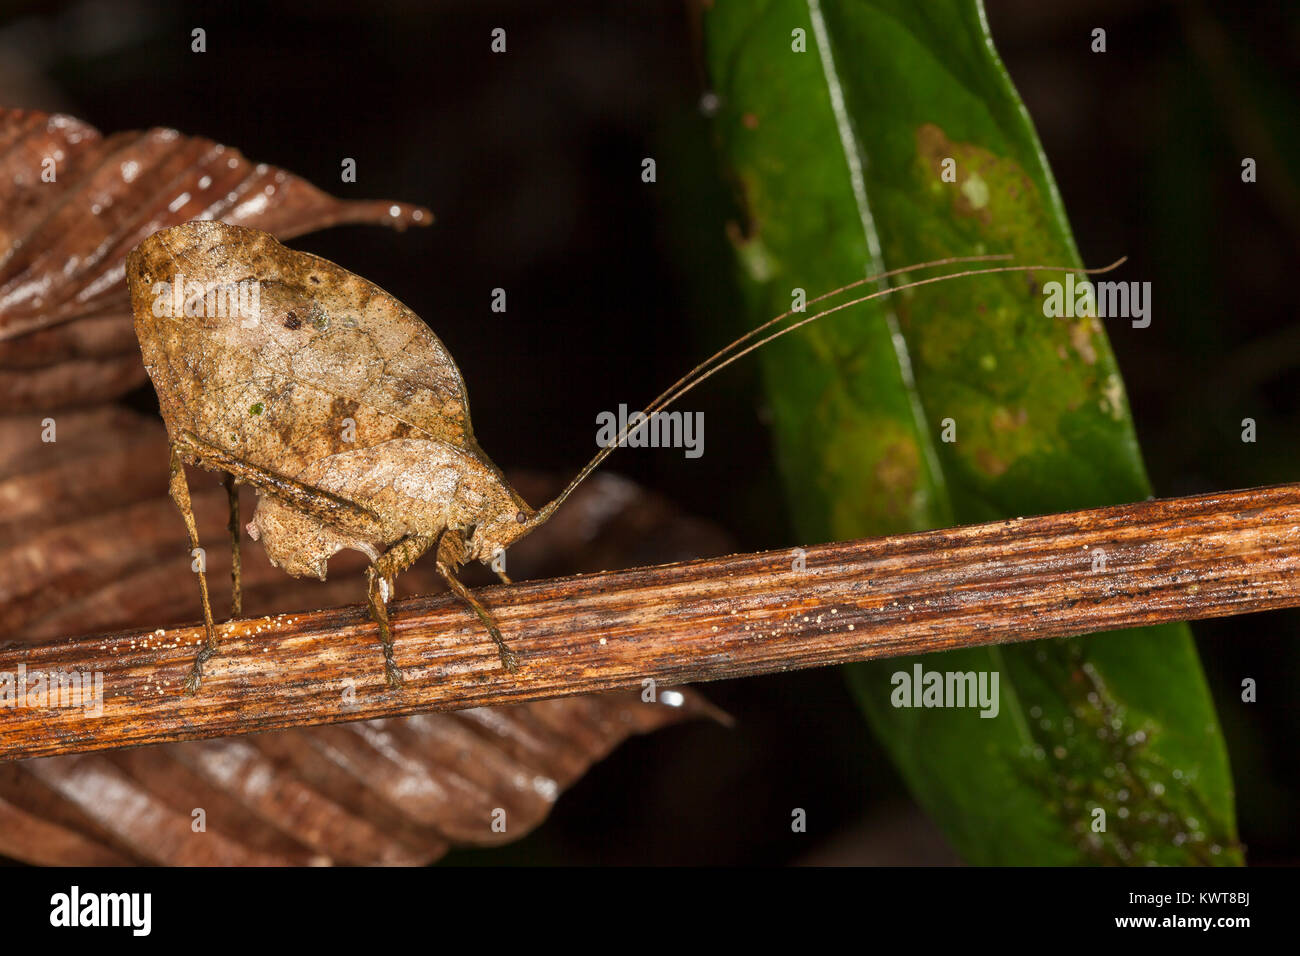 A well-camouflaged dead leaf-mimicking katydid (Order Orthoptera, Family Tettigoniidae) ovipositing (laying eggs) into a stem. Lowland rainforests of  Stock Photo